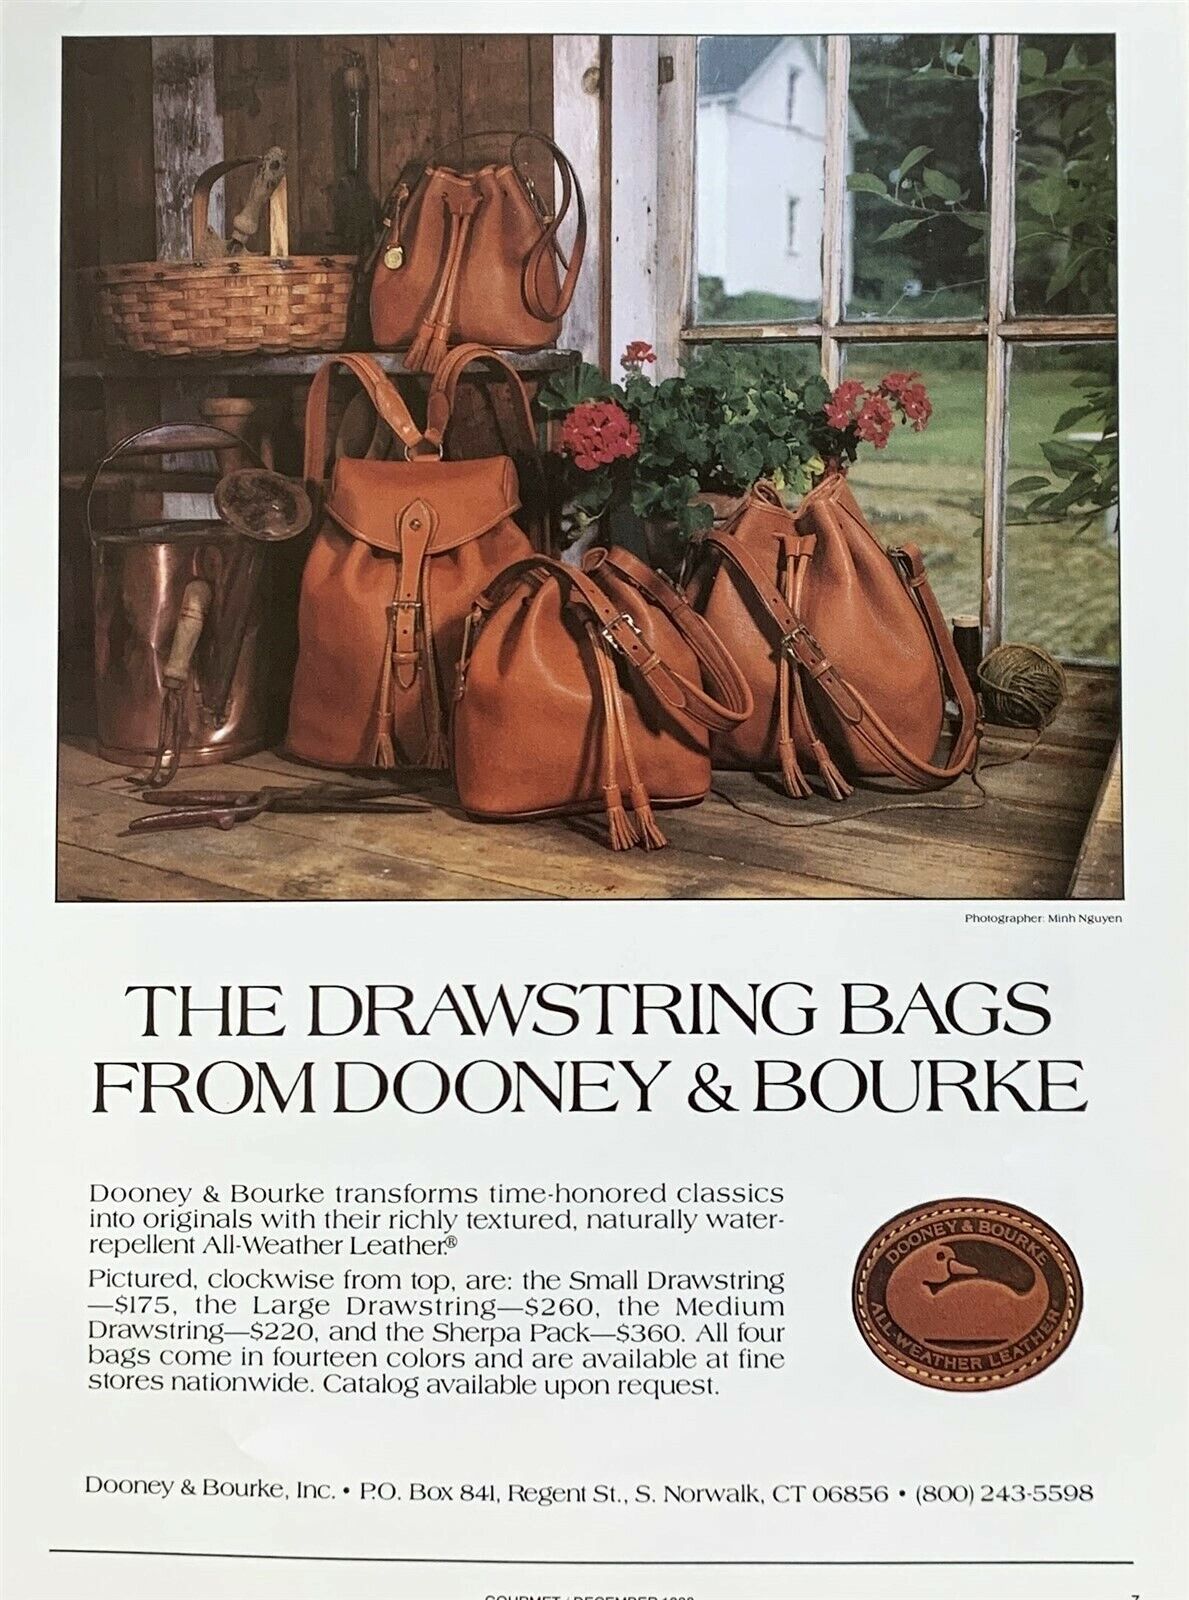 1988 Dooney & Bourke The Drawstrings Bags Photo By Minh Nguyem Print Ad